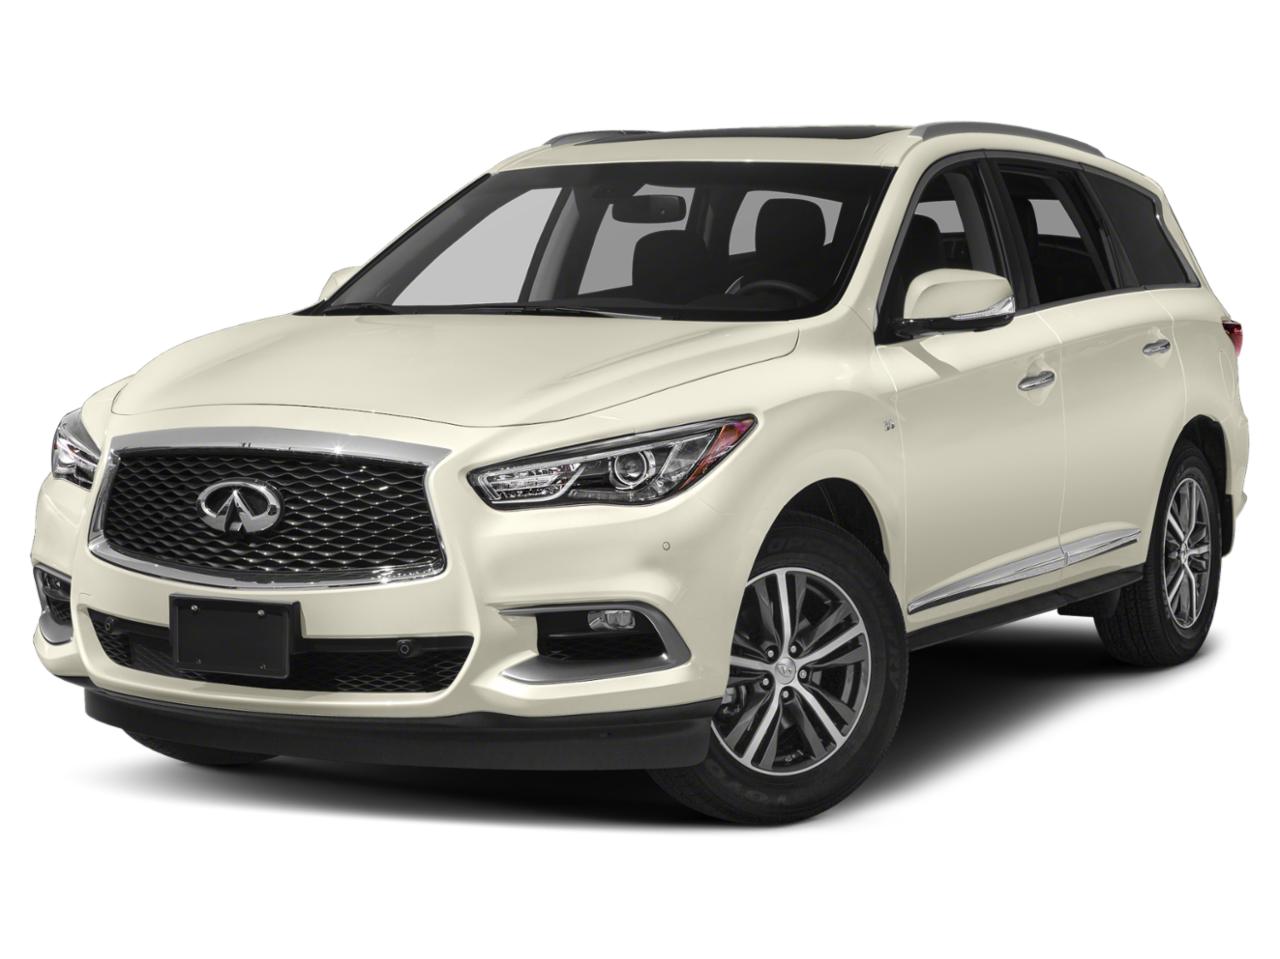 2019 INFINITI QX60 Vehicle Photo in Towson, MD 21204